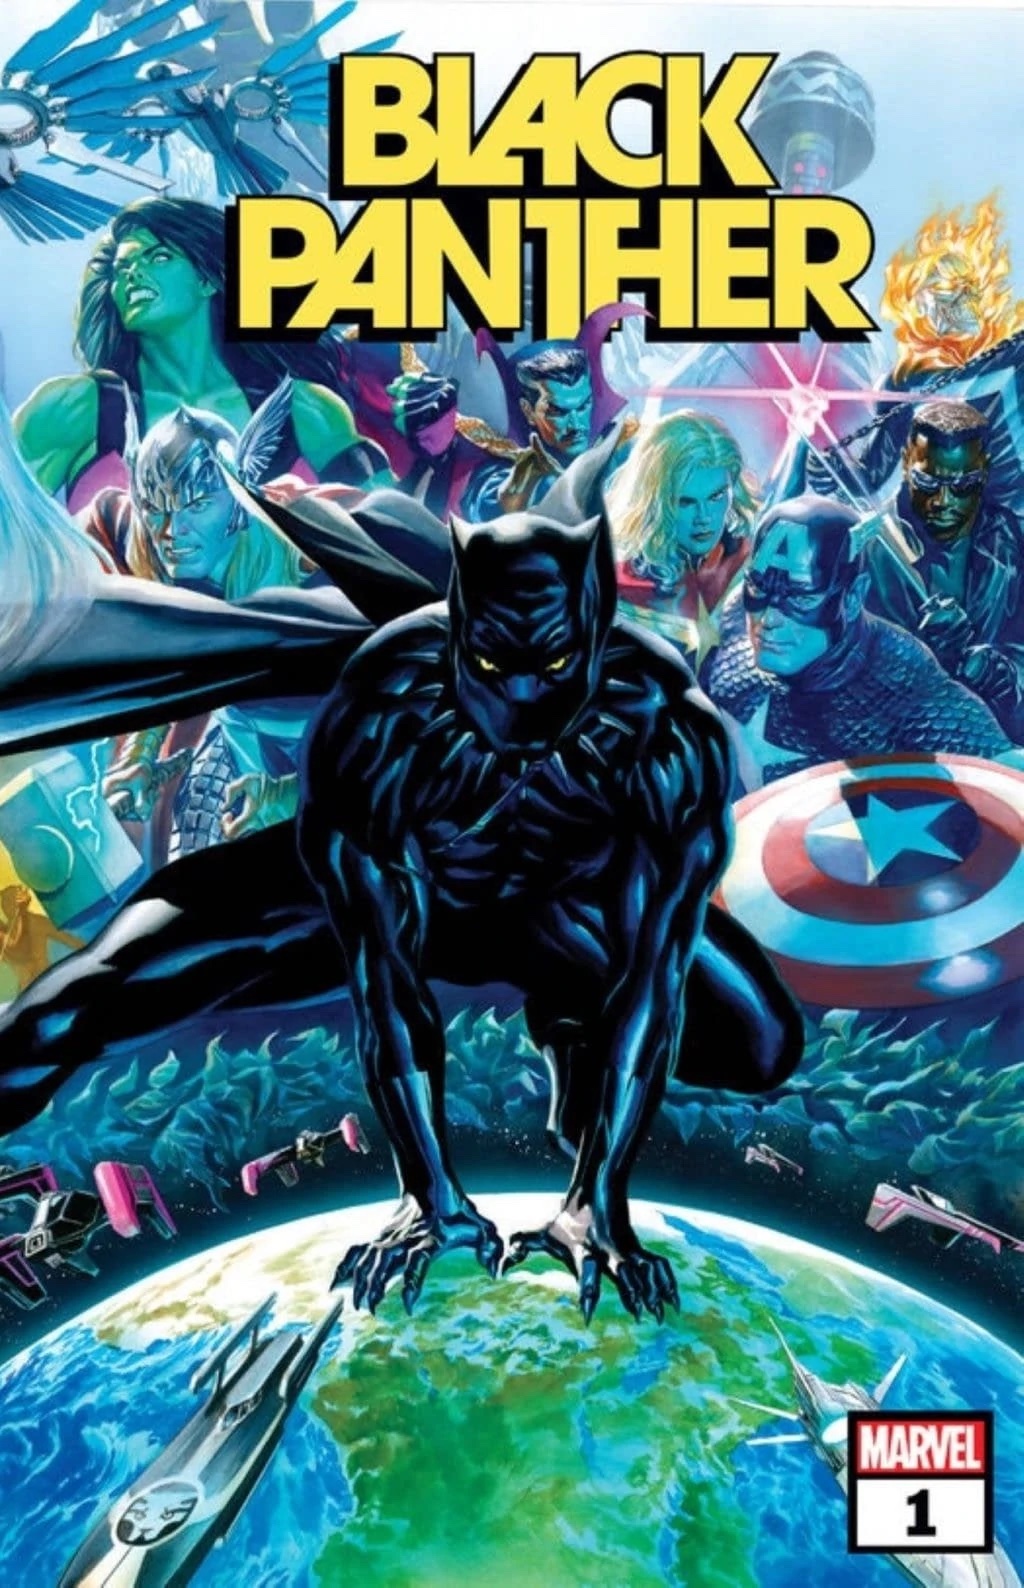 The Black Panther crouches astride the planet Earth with the Avengers assembled behind him on the cover of Black Panther #1 (2021). 